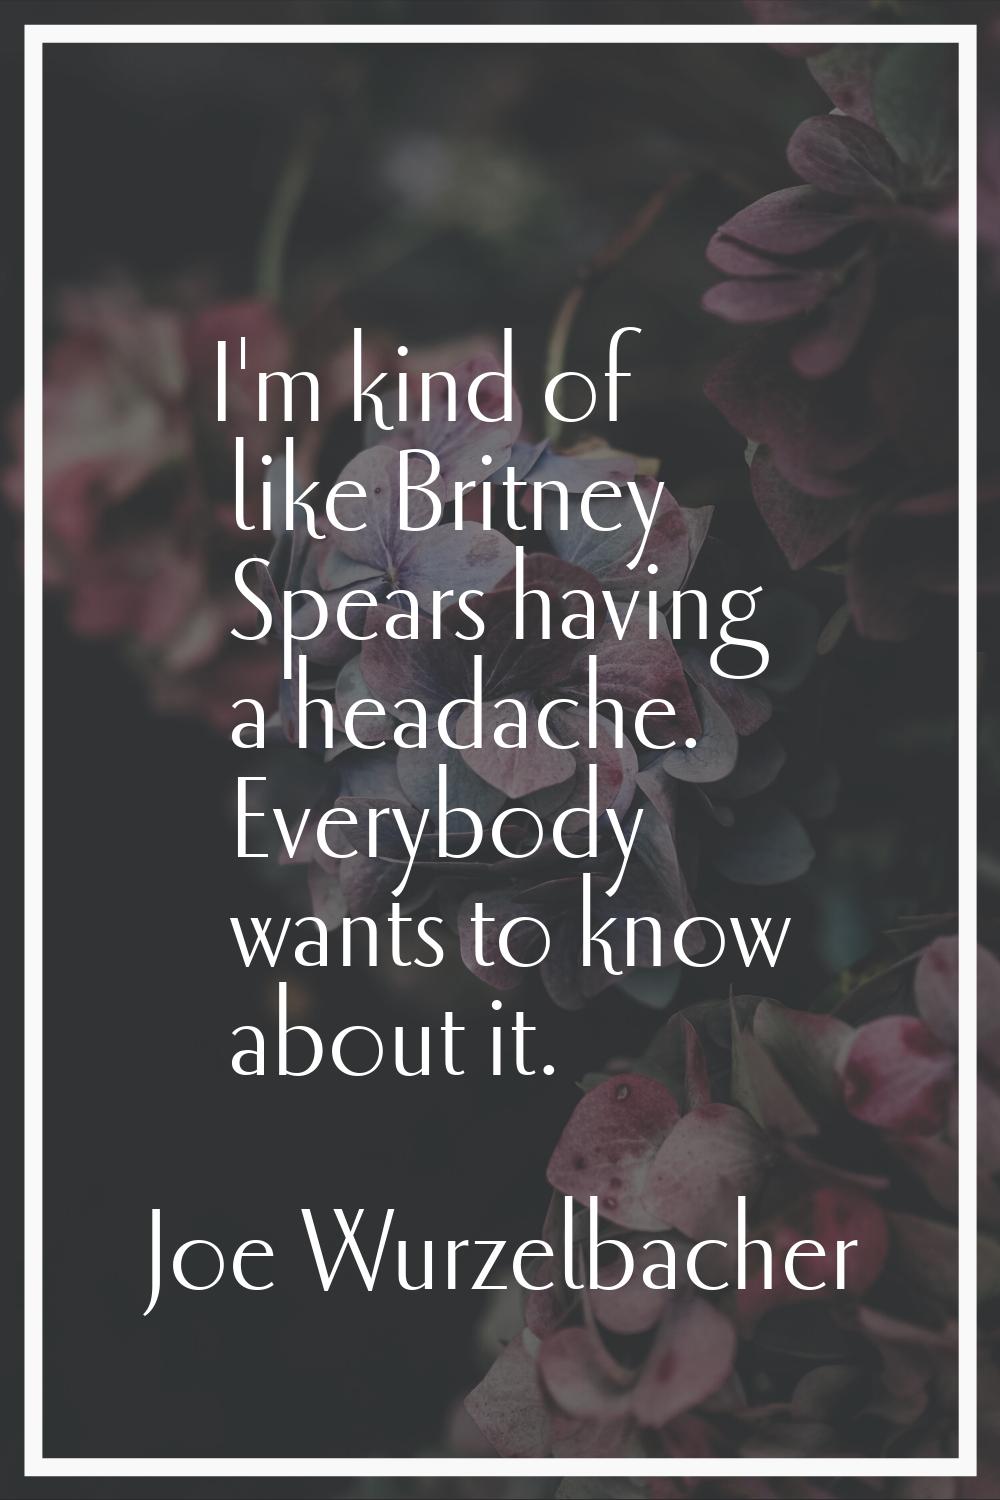 I'm kind of like Britney Spears having a headache. Everybody wants to know about it.